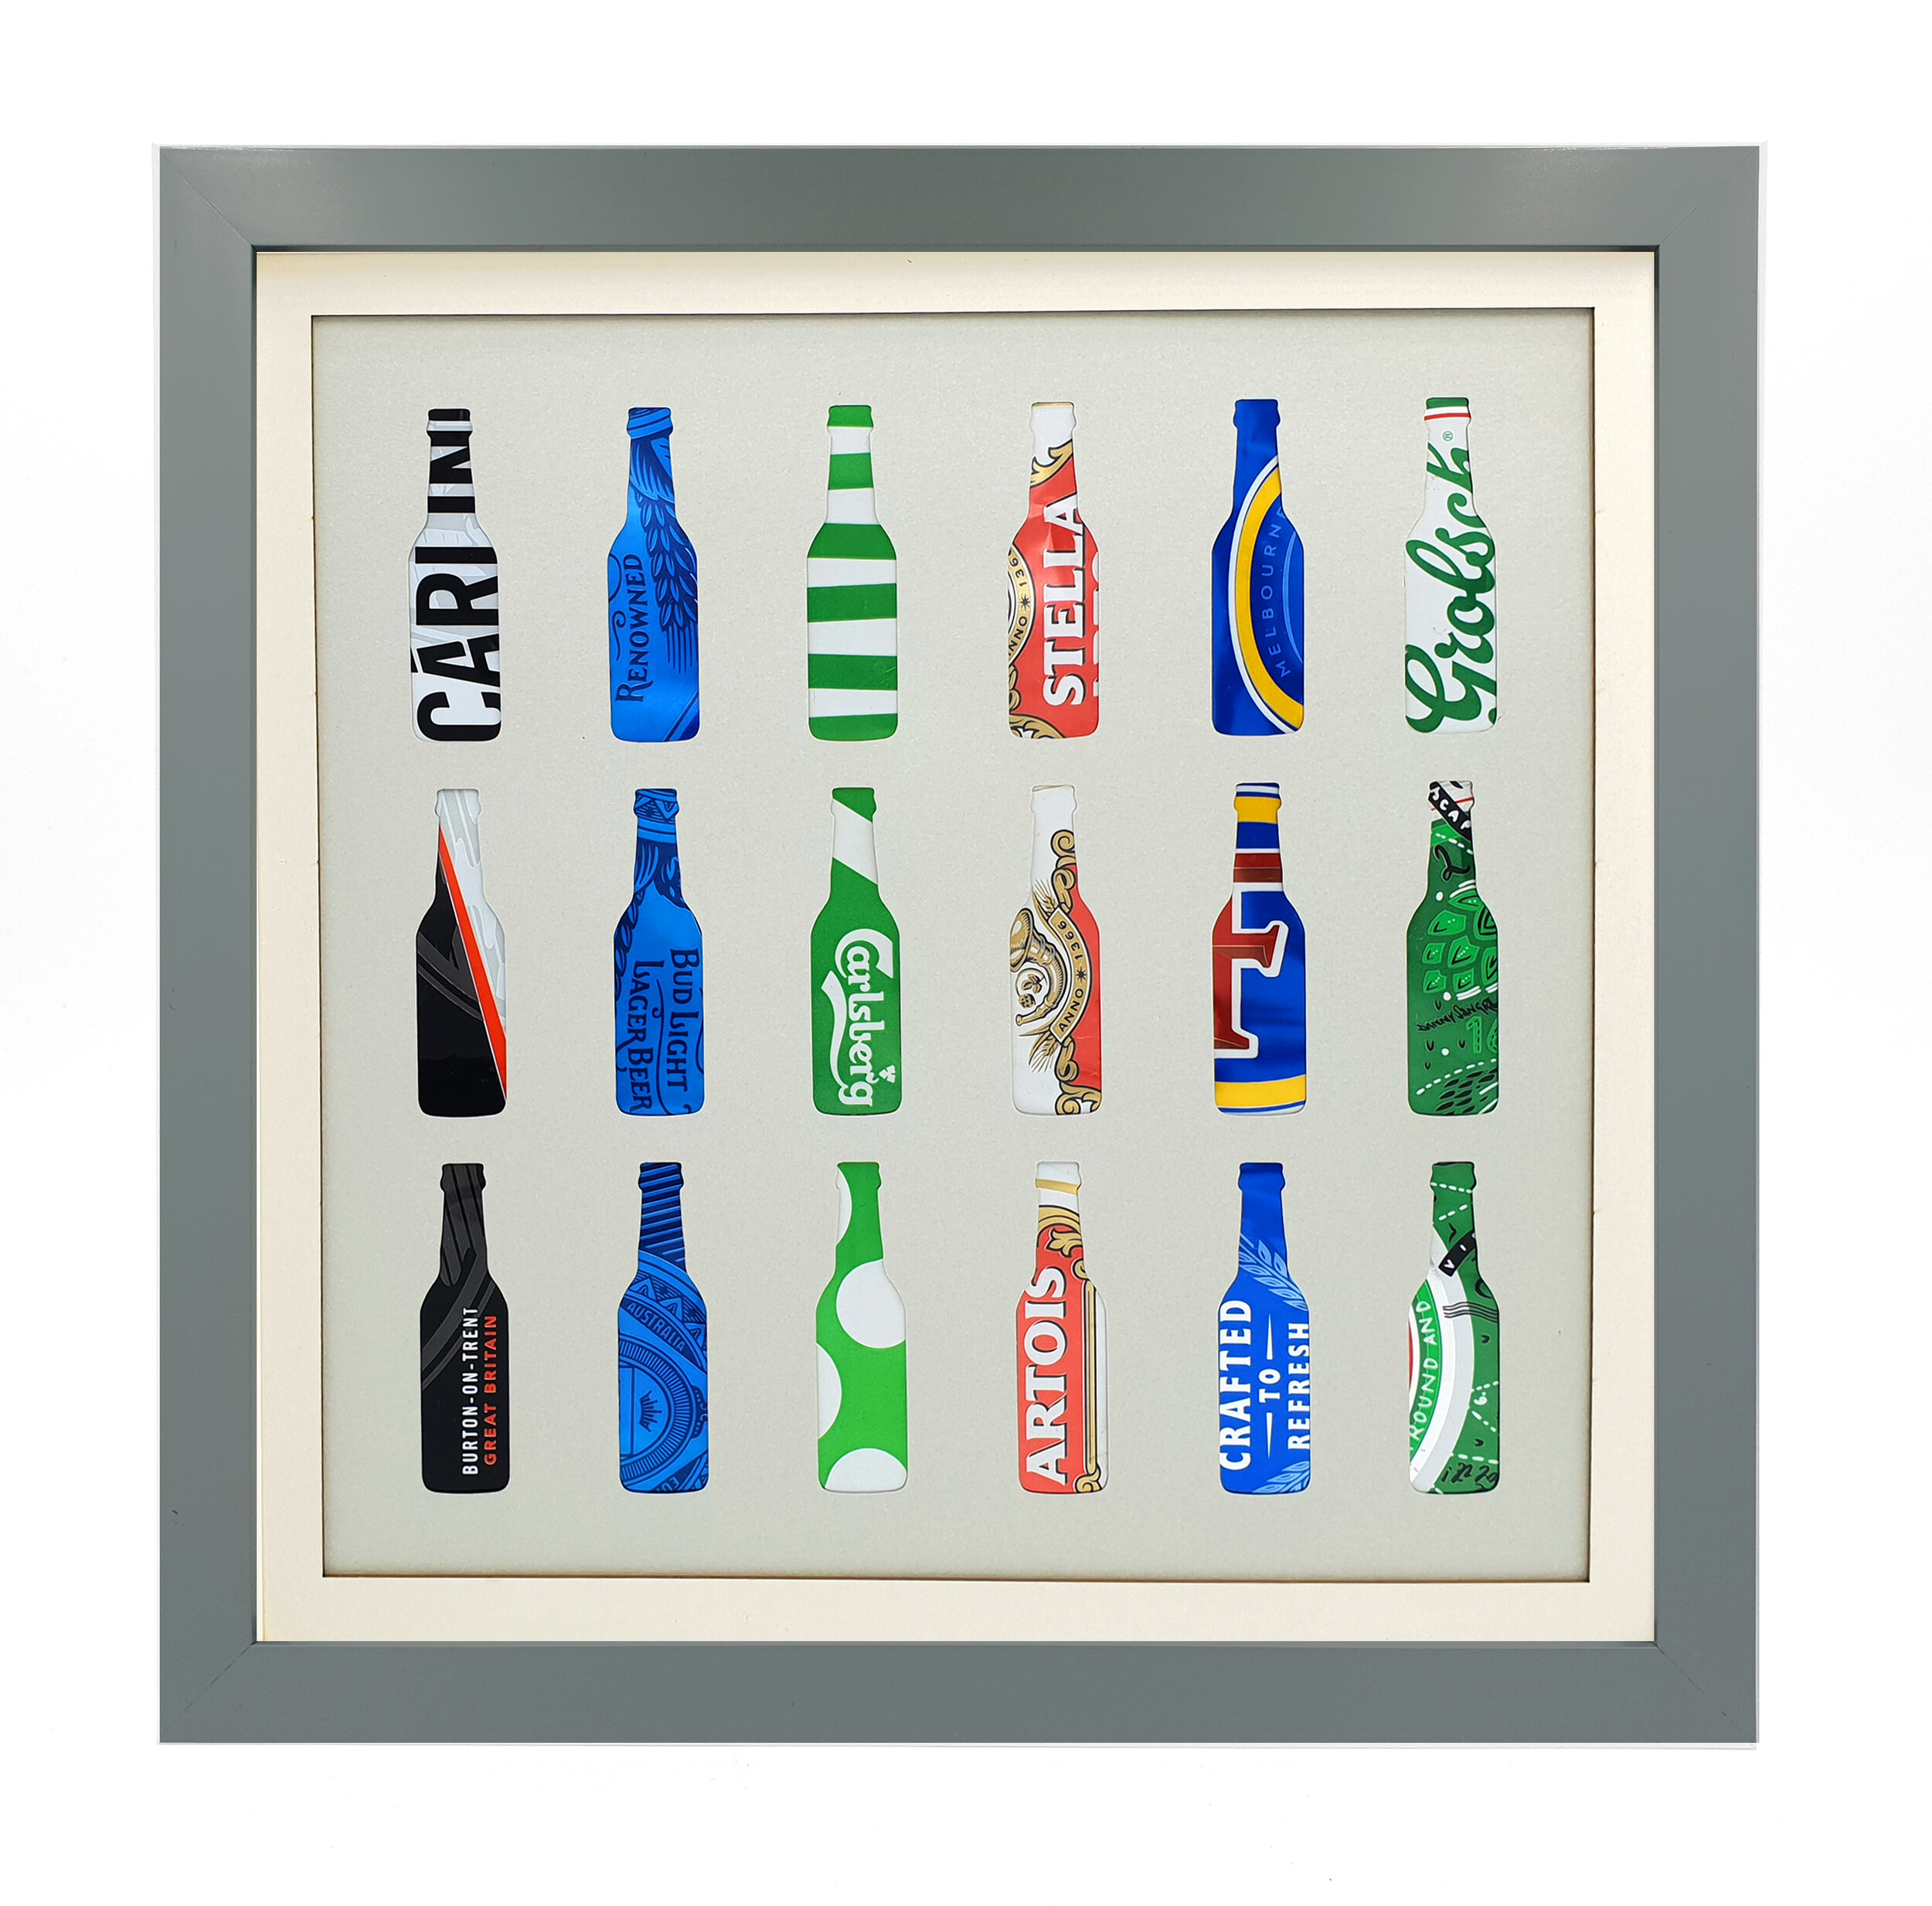 Six Lagers Silhouette vibrant upcycled can eco art grey frame 